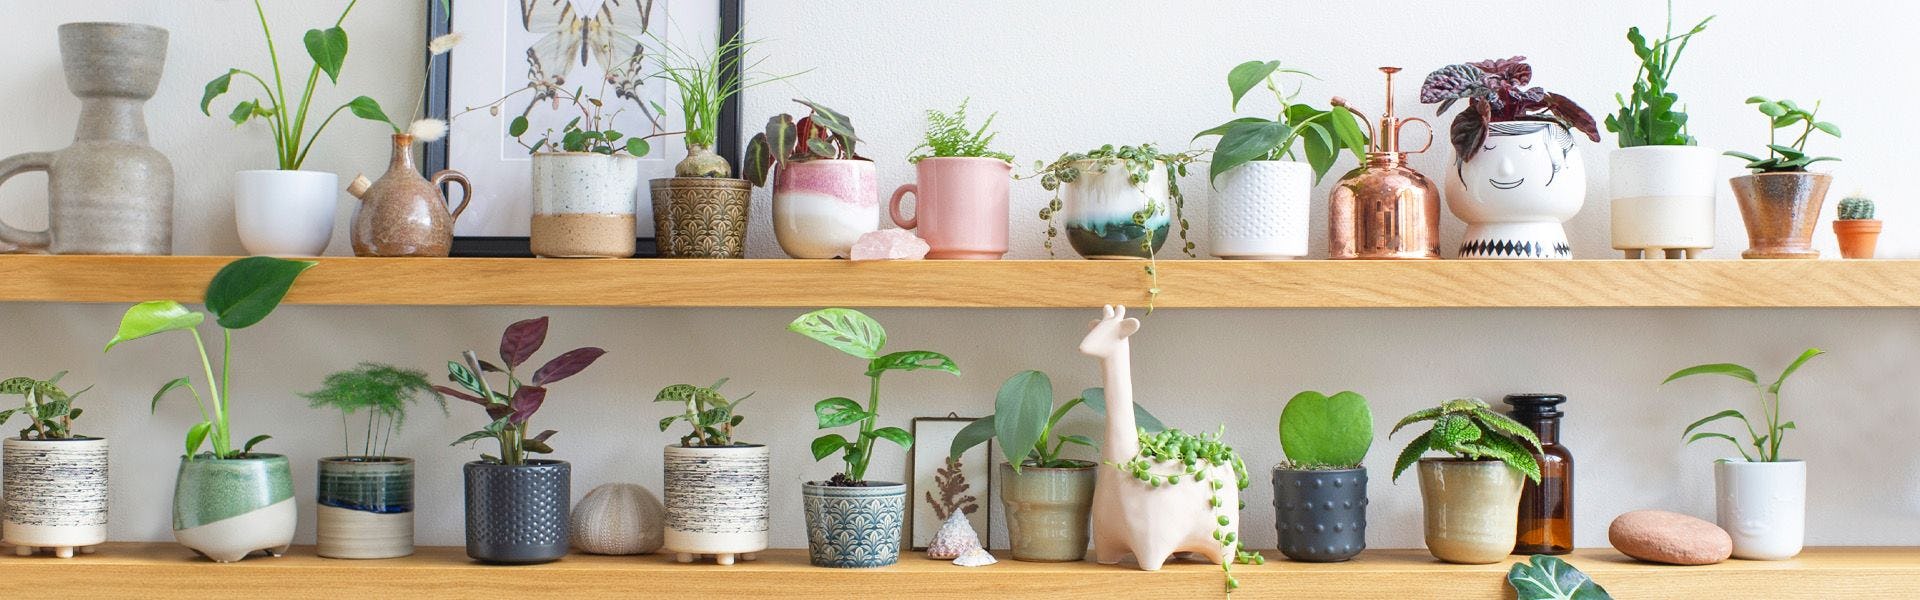 styled plants and pots